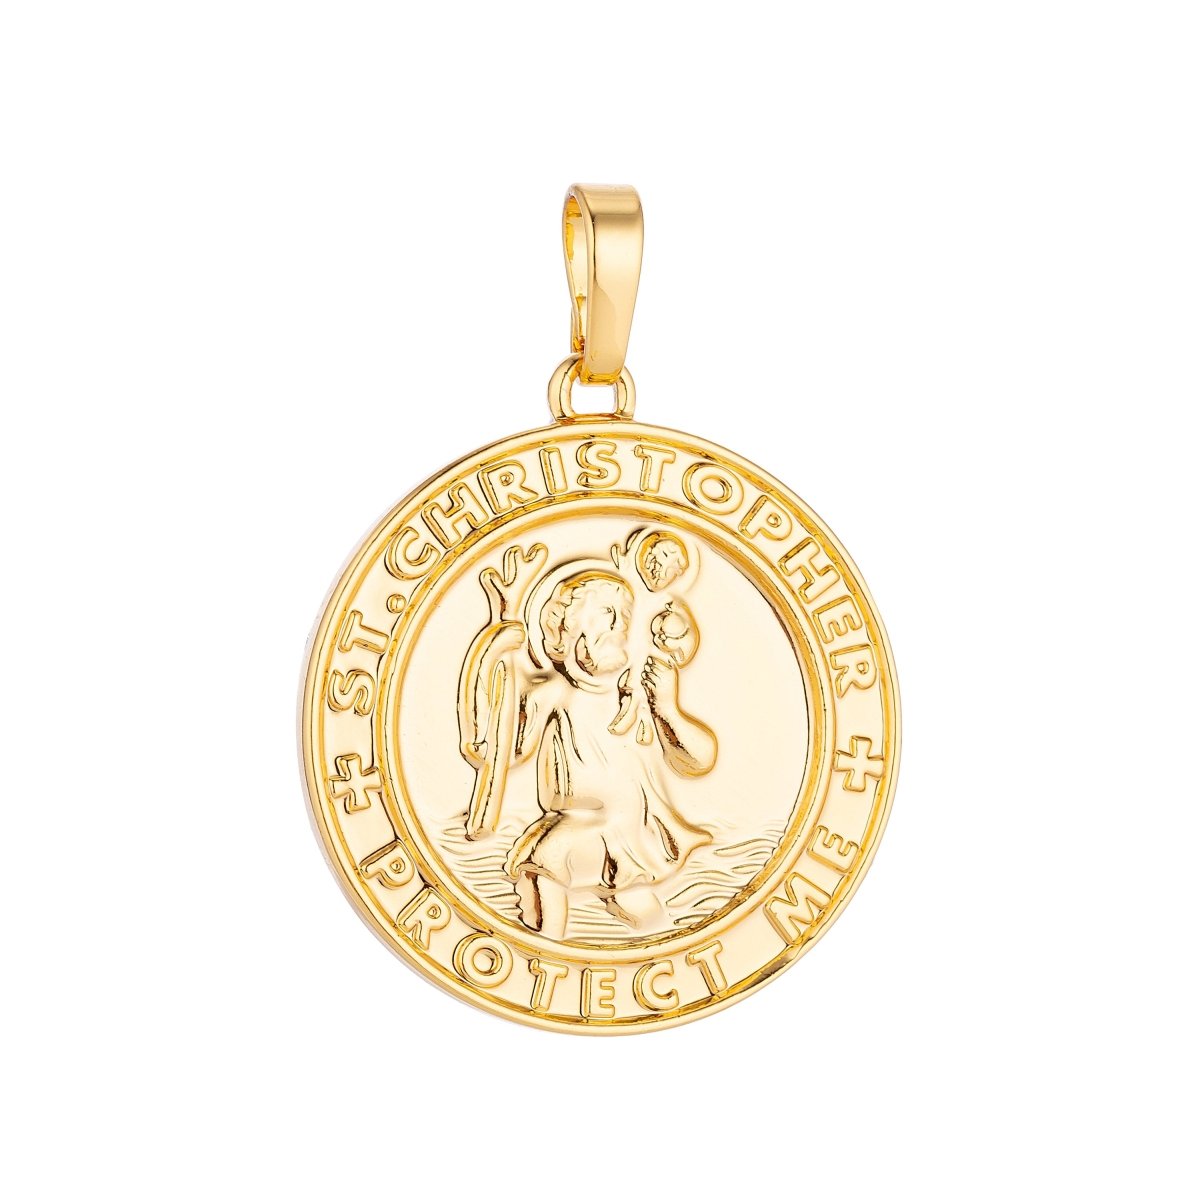 Overstock Pricing 24k Gold Filled Saint Christopher Medal Pendant for Protection Protect us Religious Amulet charm for Necklace Jewelry Making H-213 - DLUXCA